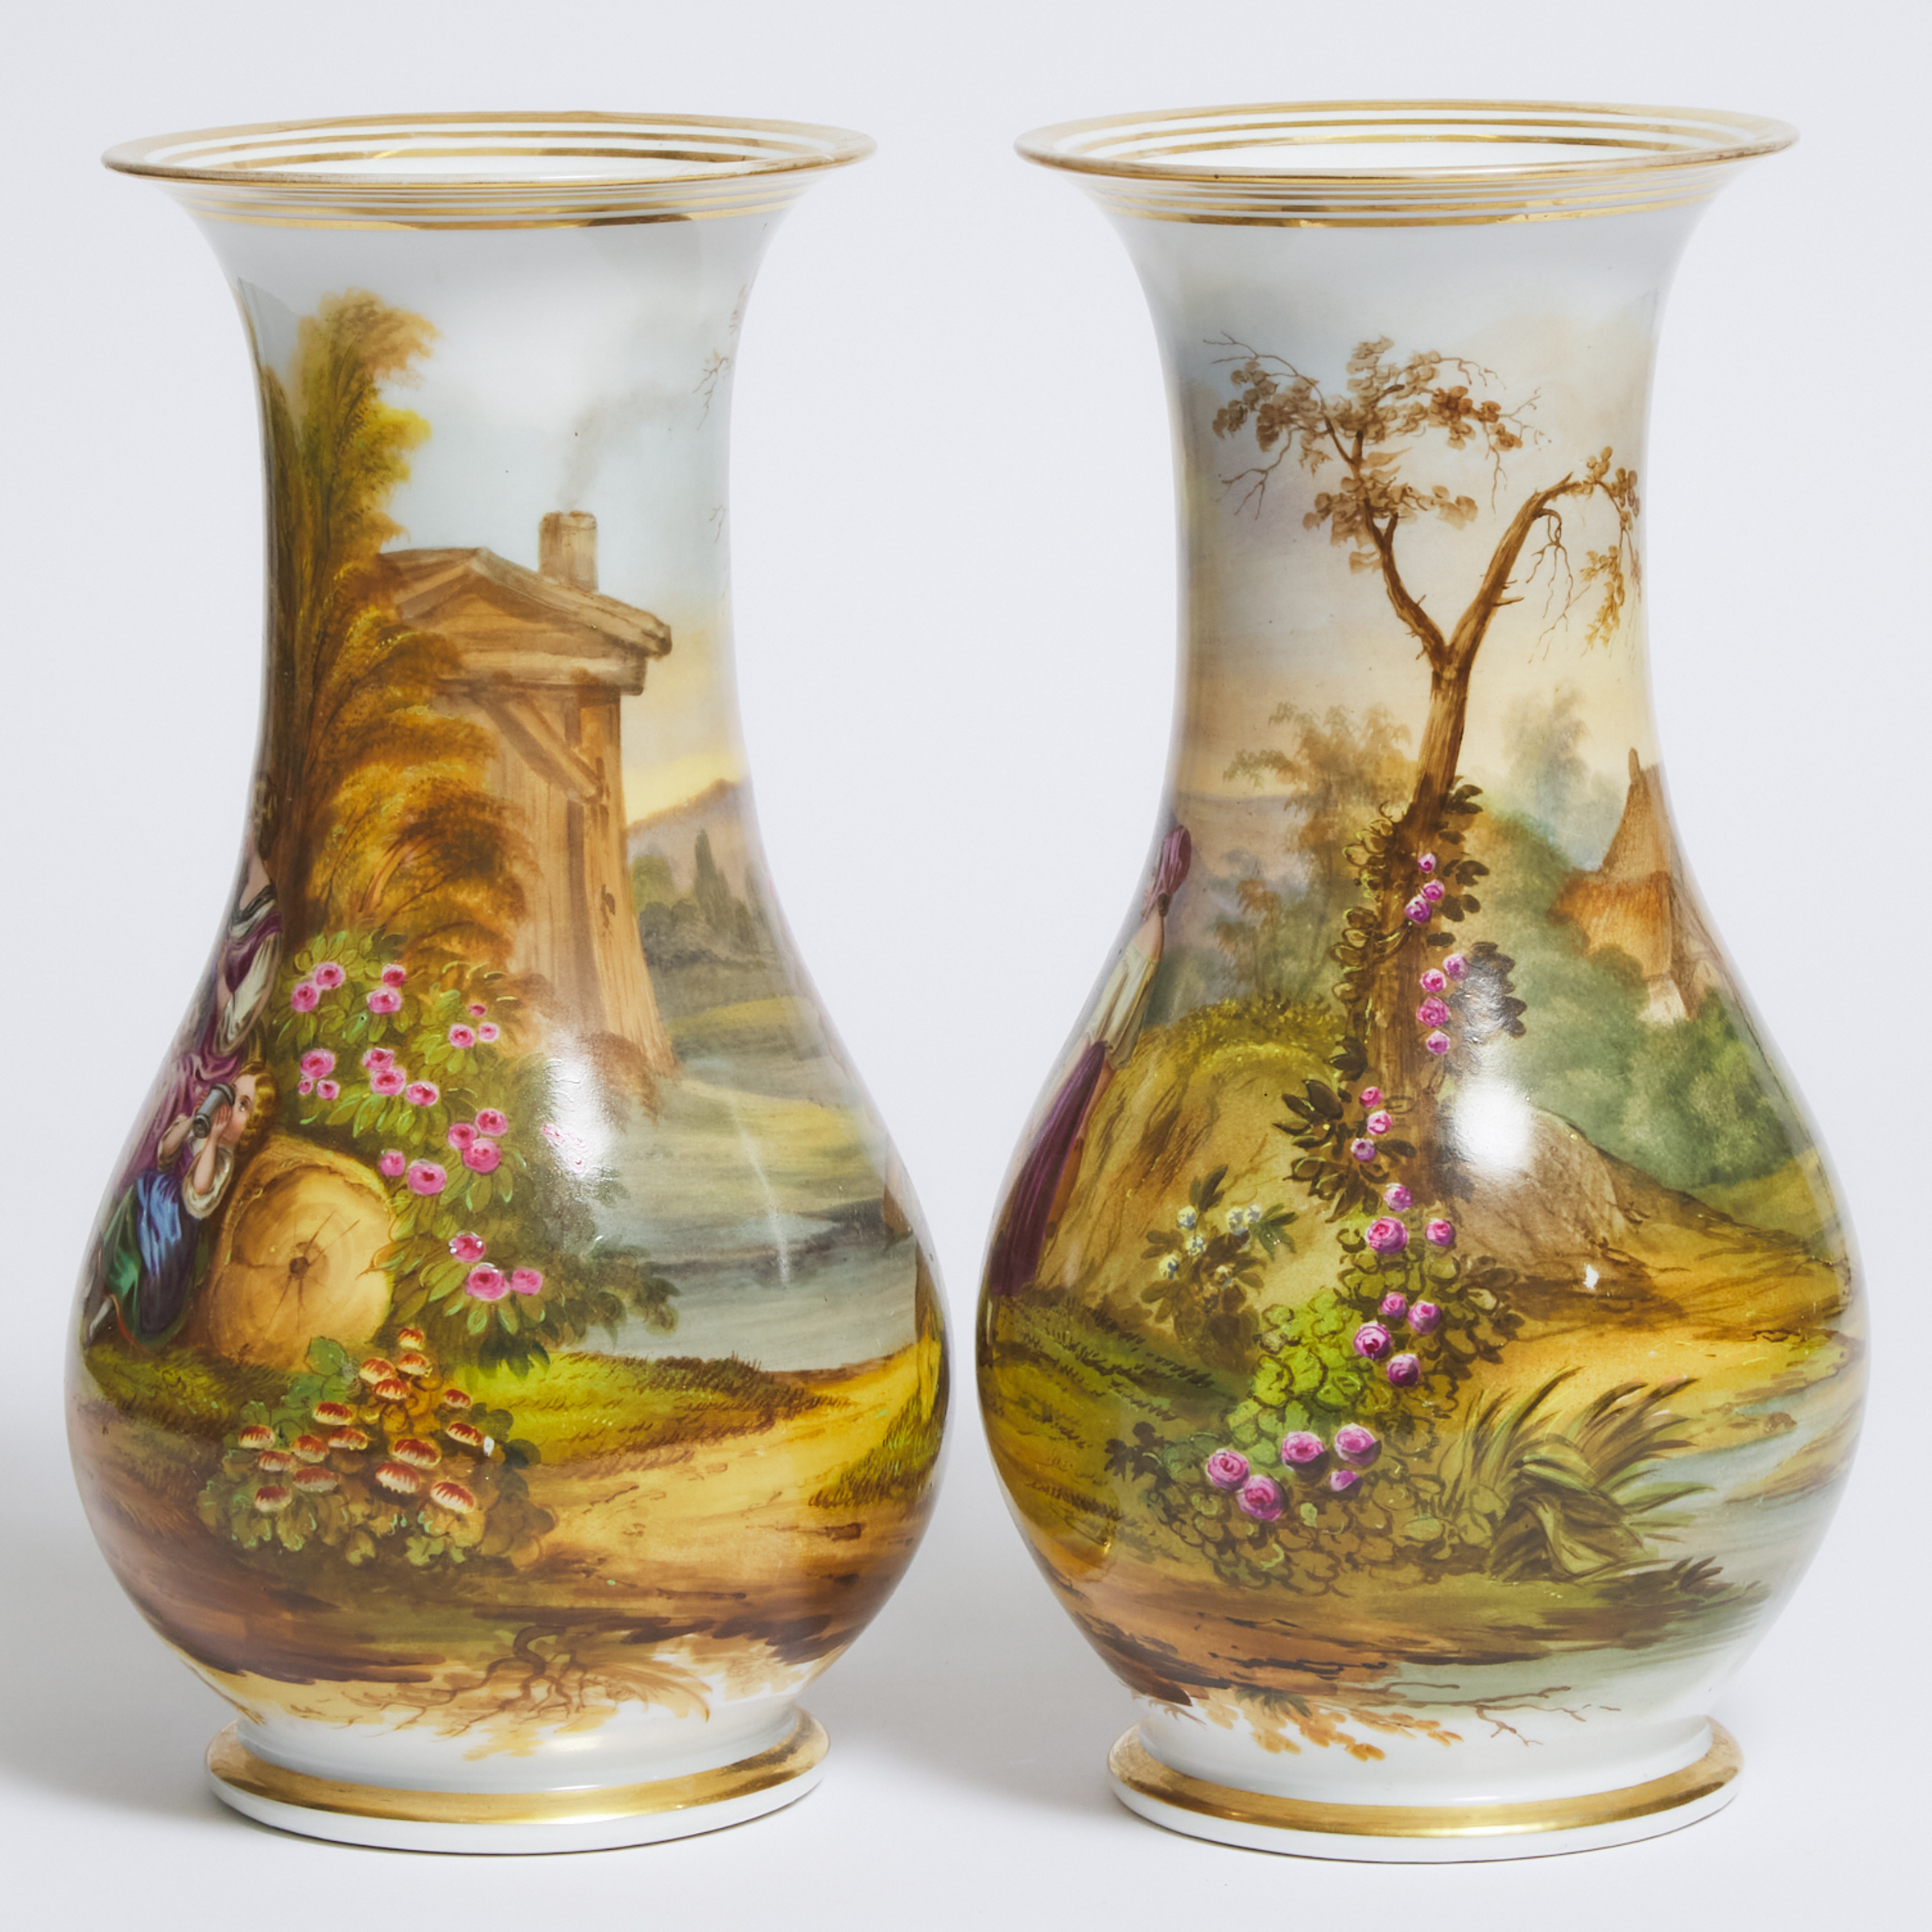 Pair of French Porcelain Vases, probably Paris, 19th century